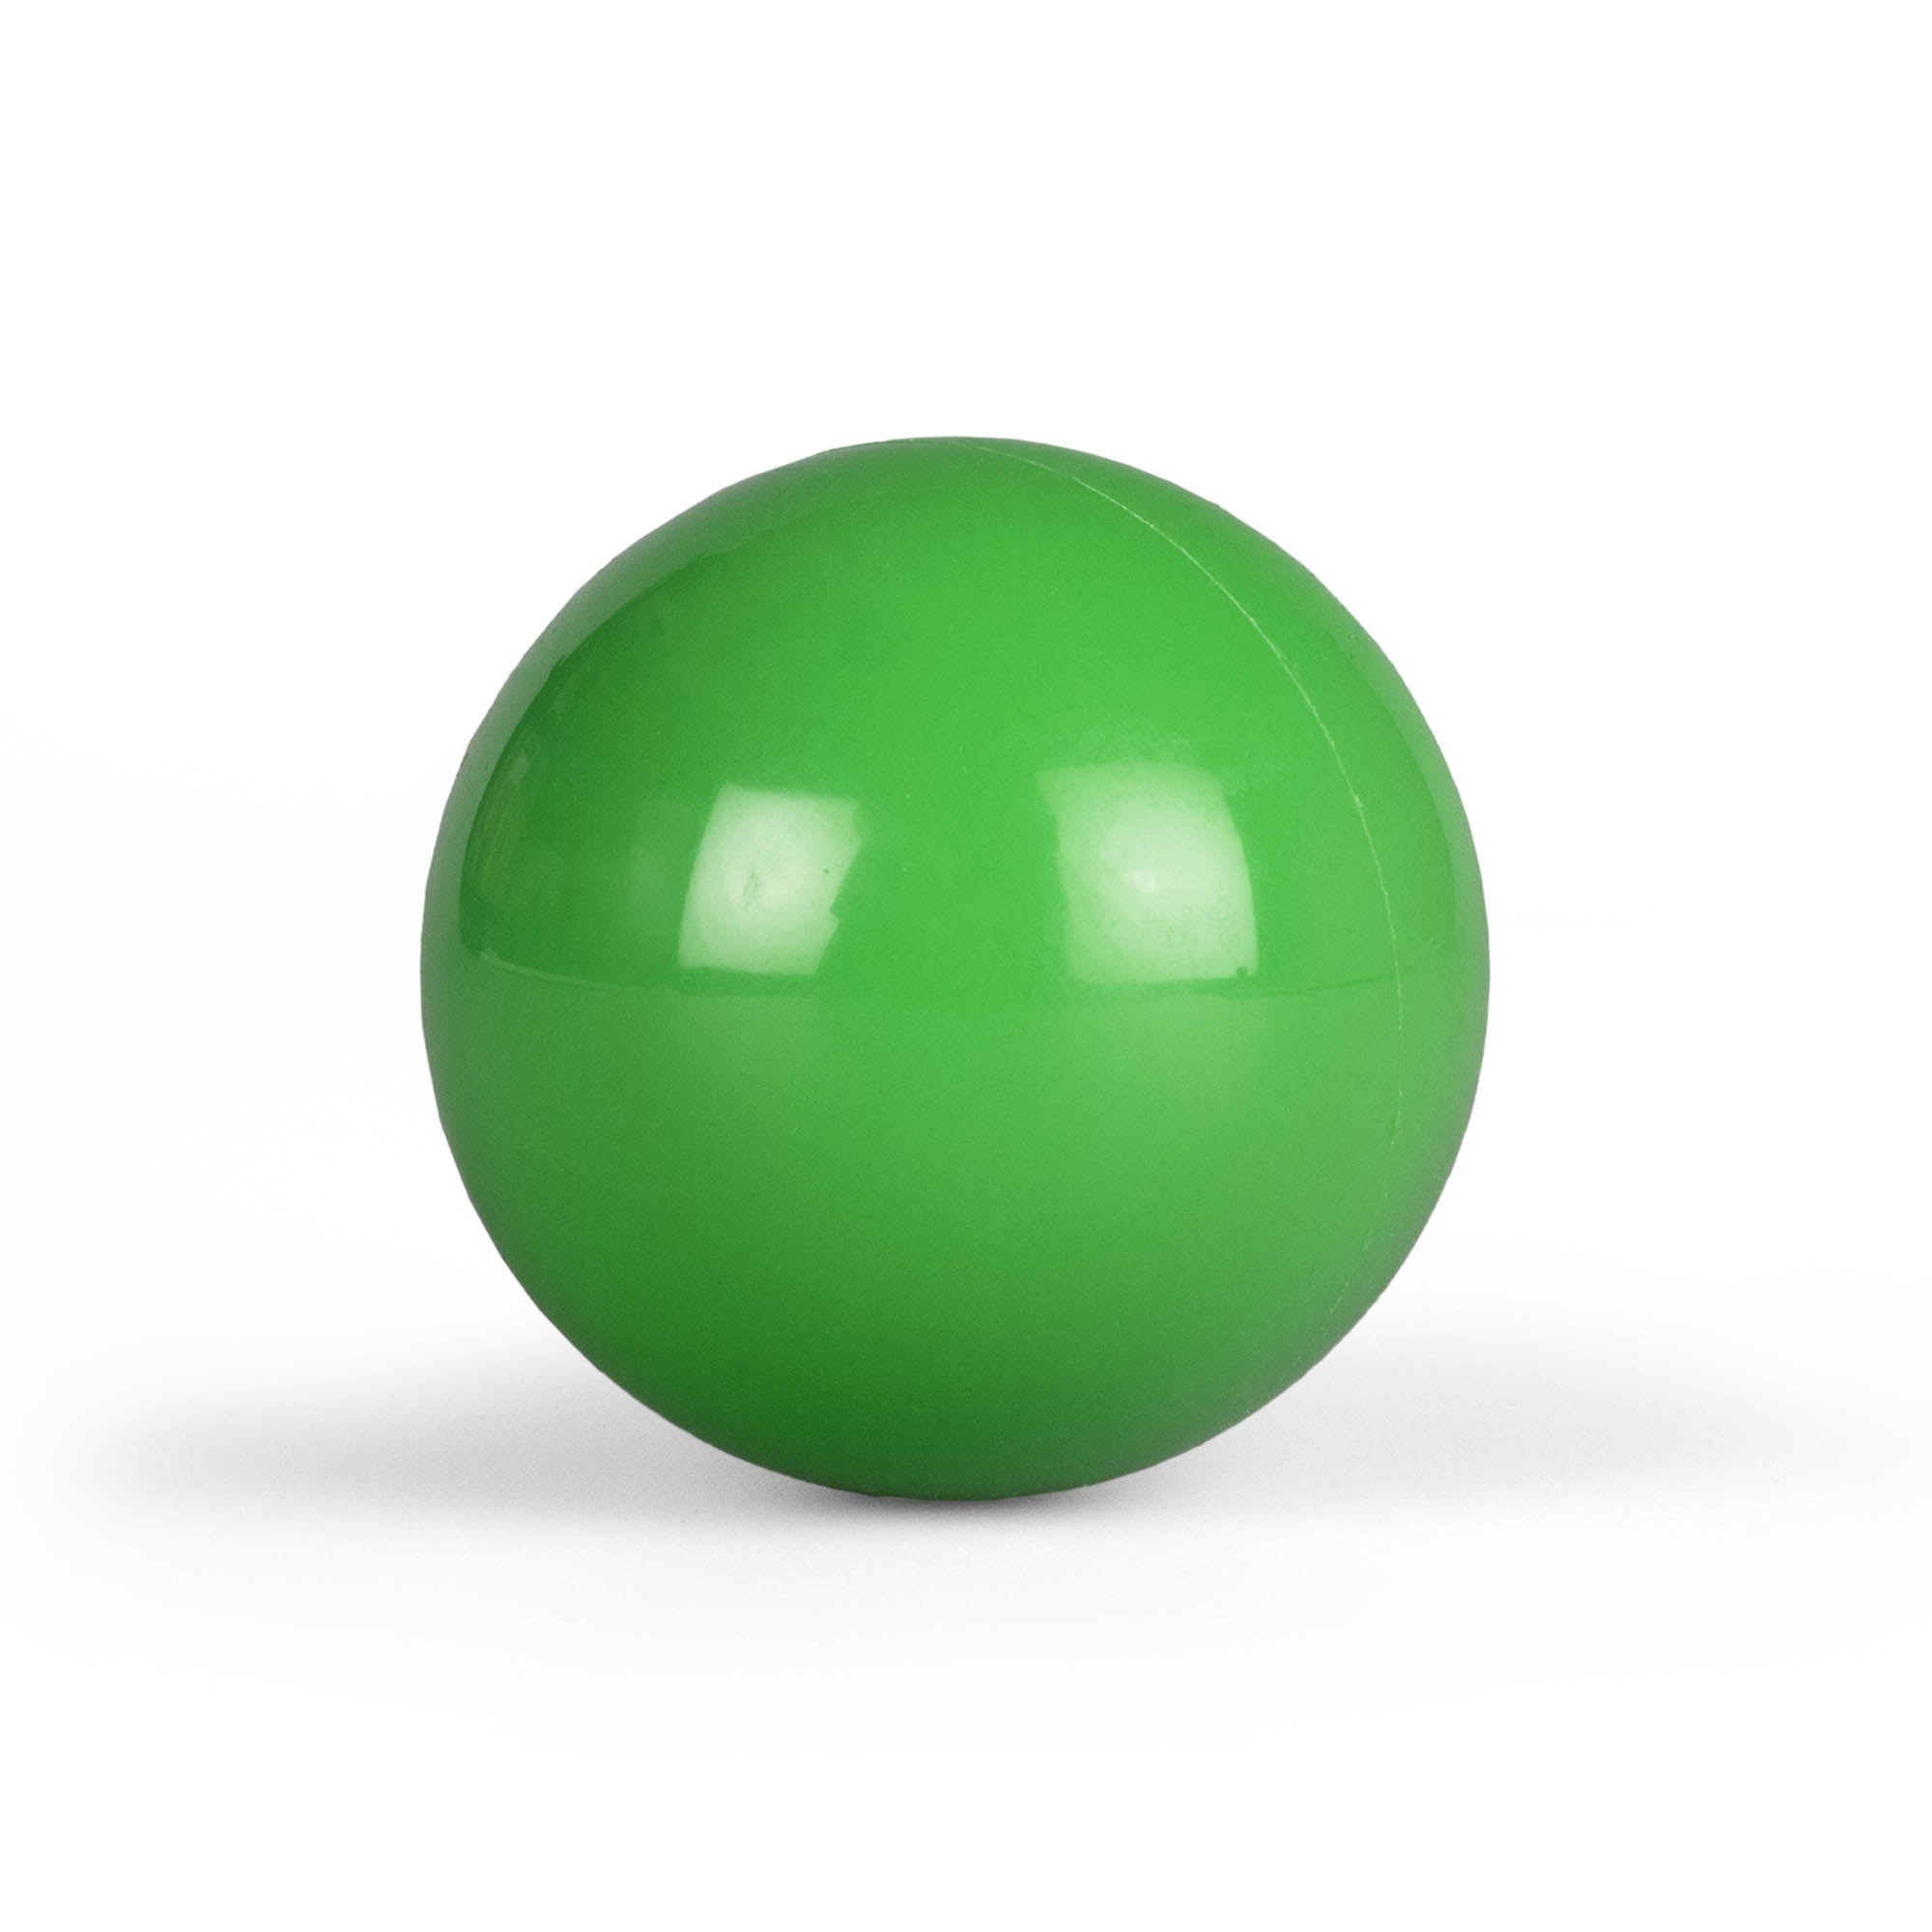 Mr Babache stage ball 80mm in green